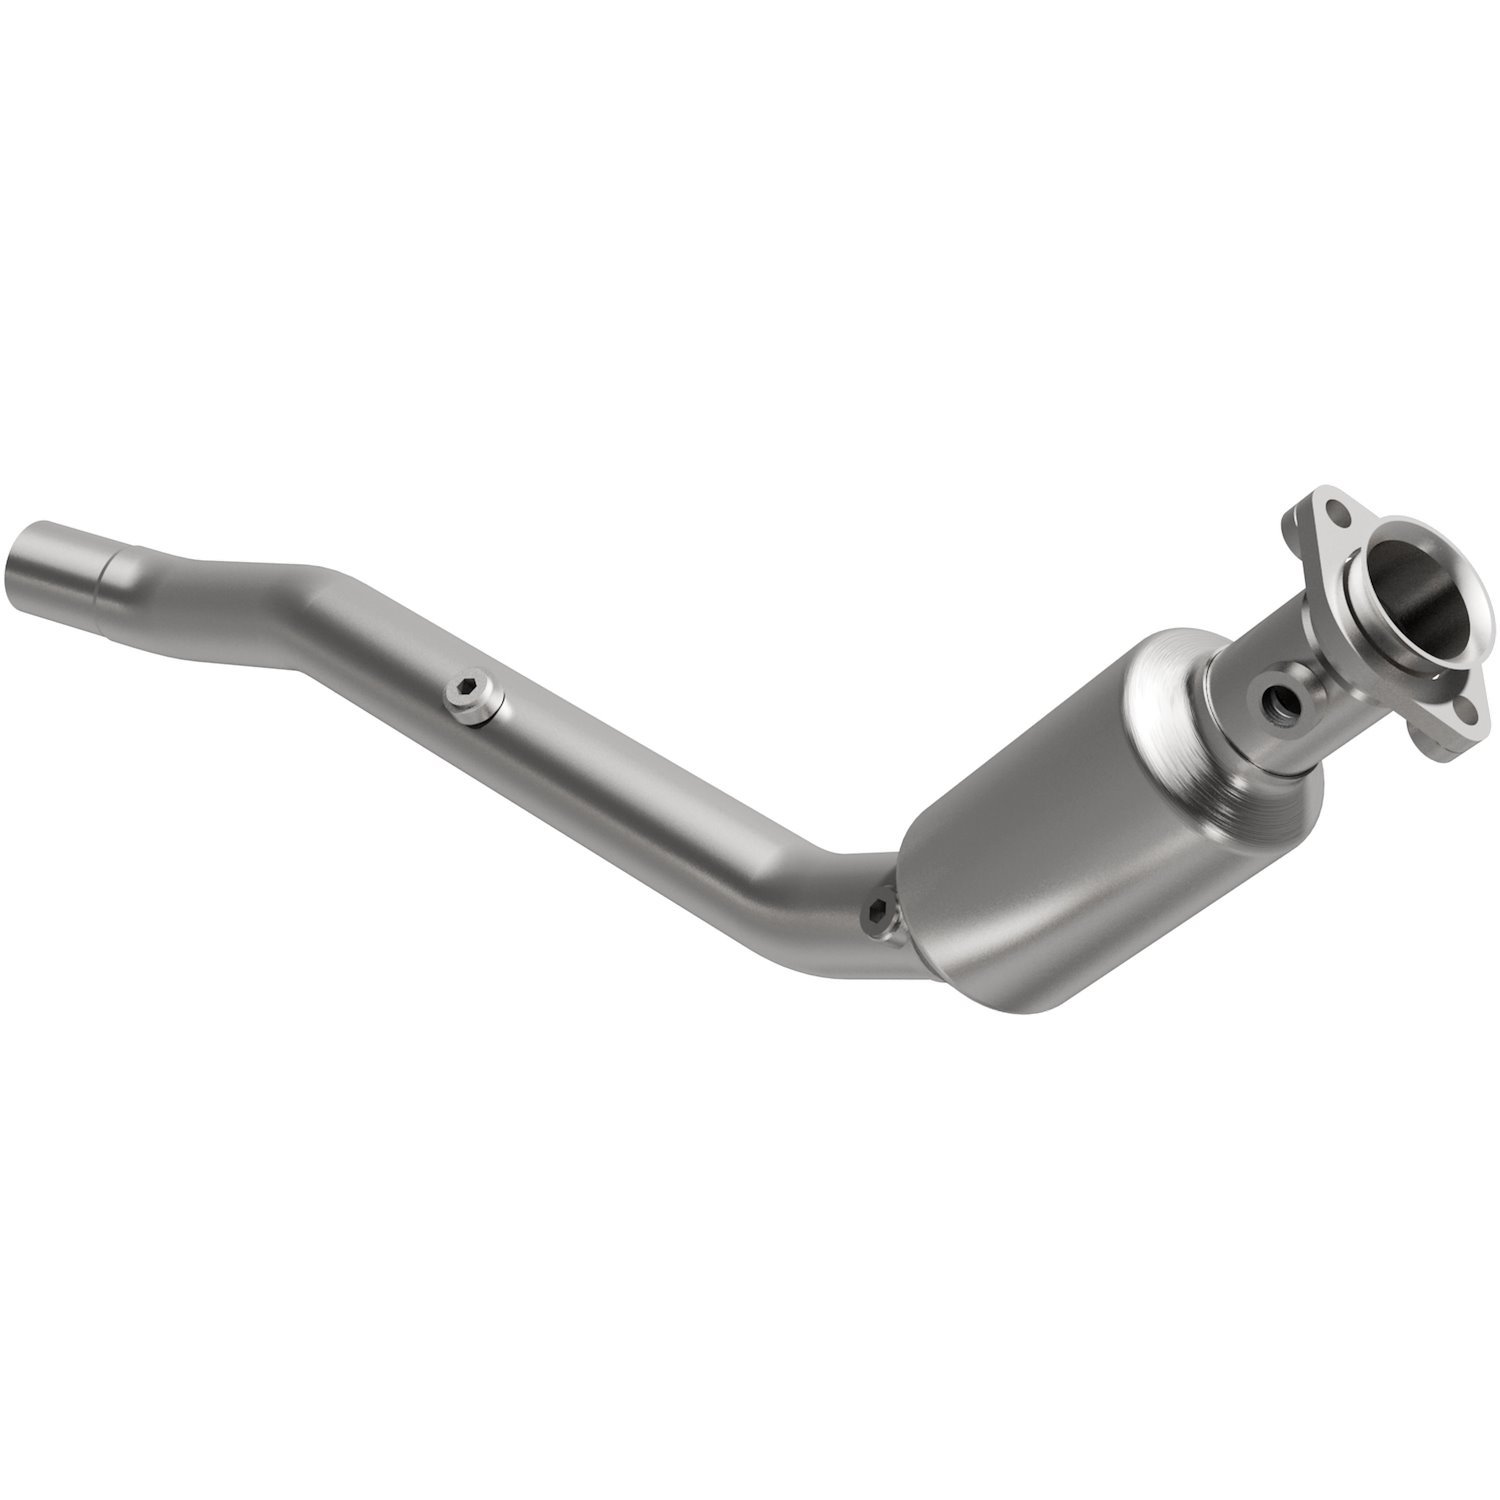 2007-2009 Land Rover Range Rover Sport California Grade CARB Compliant Direct-Fit Catalytic Converter